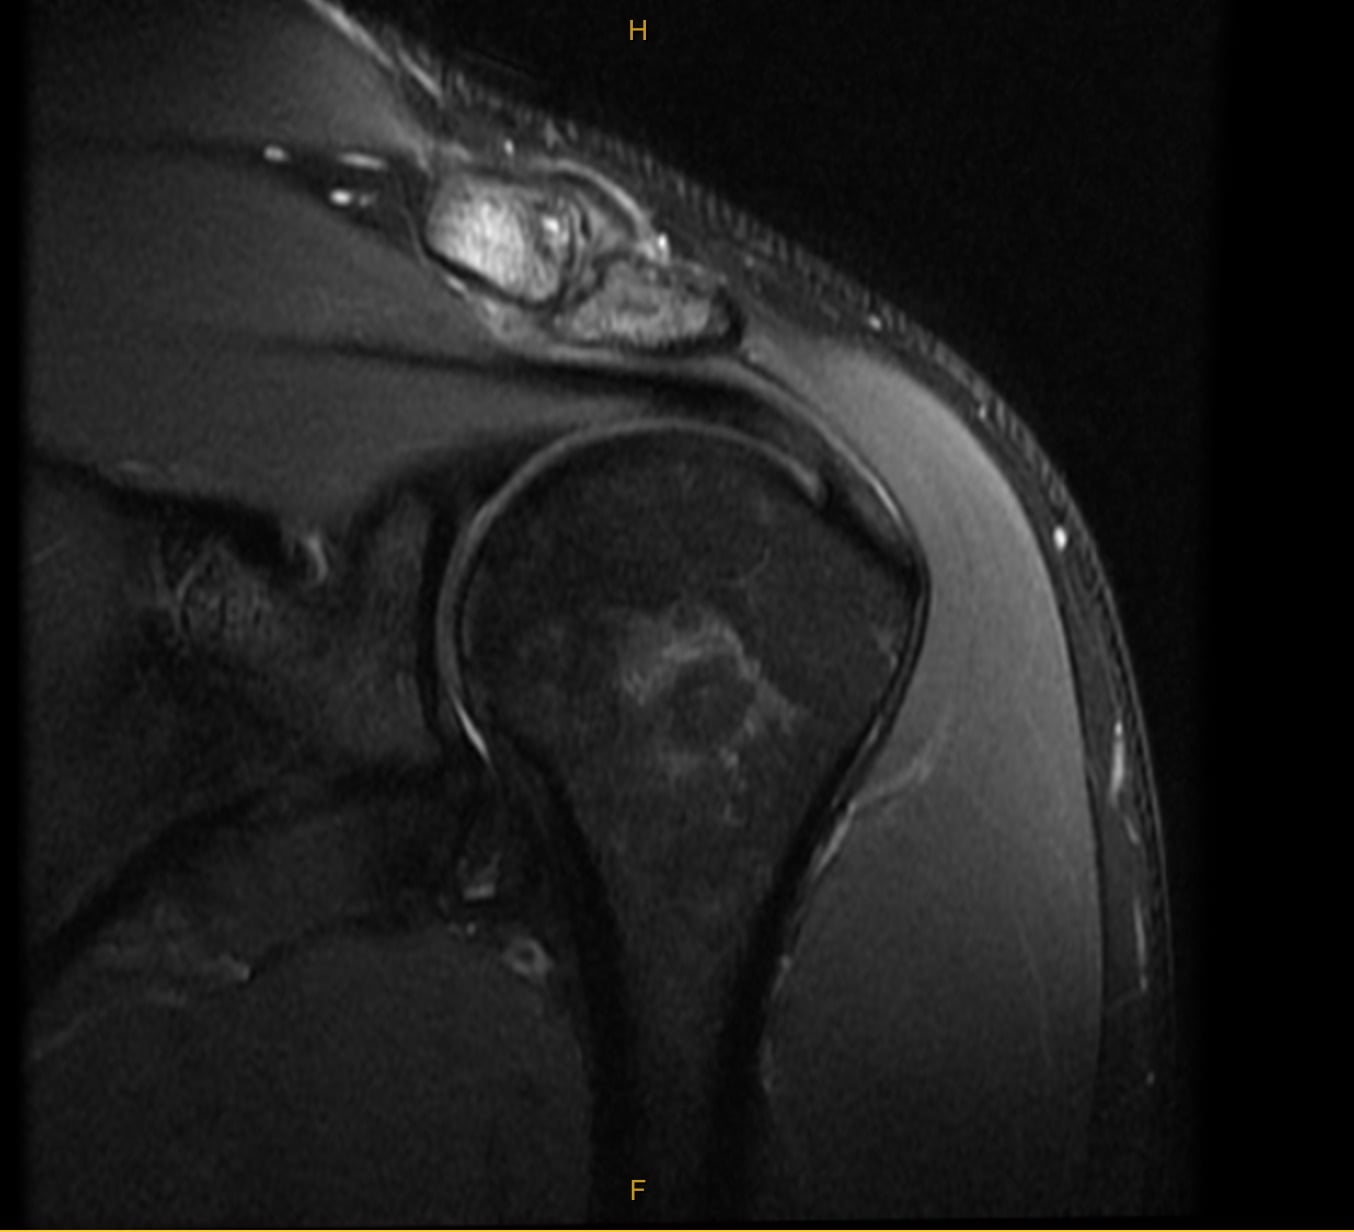 Preoperative MRI of patient clavicle to receive Distal Clavicle Resection (Mumford Procedure)